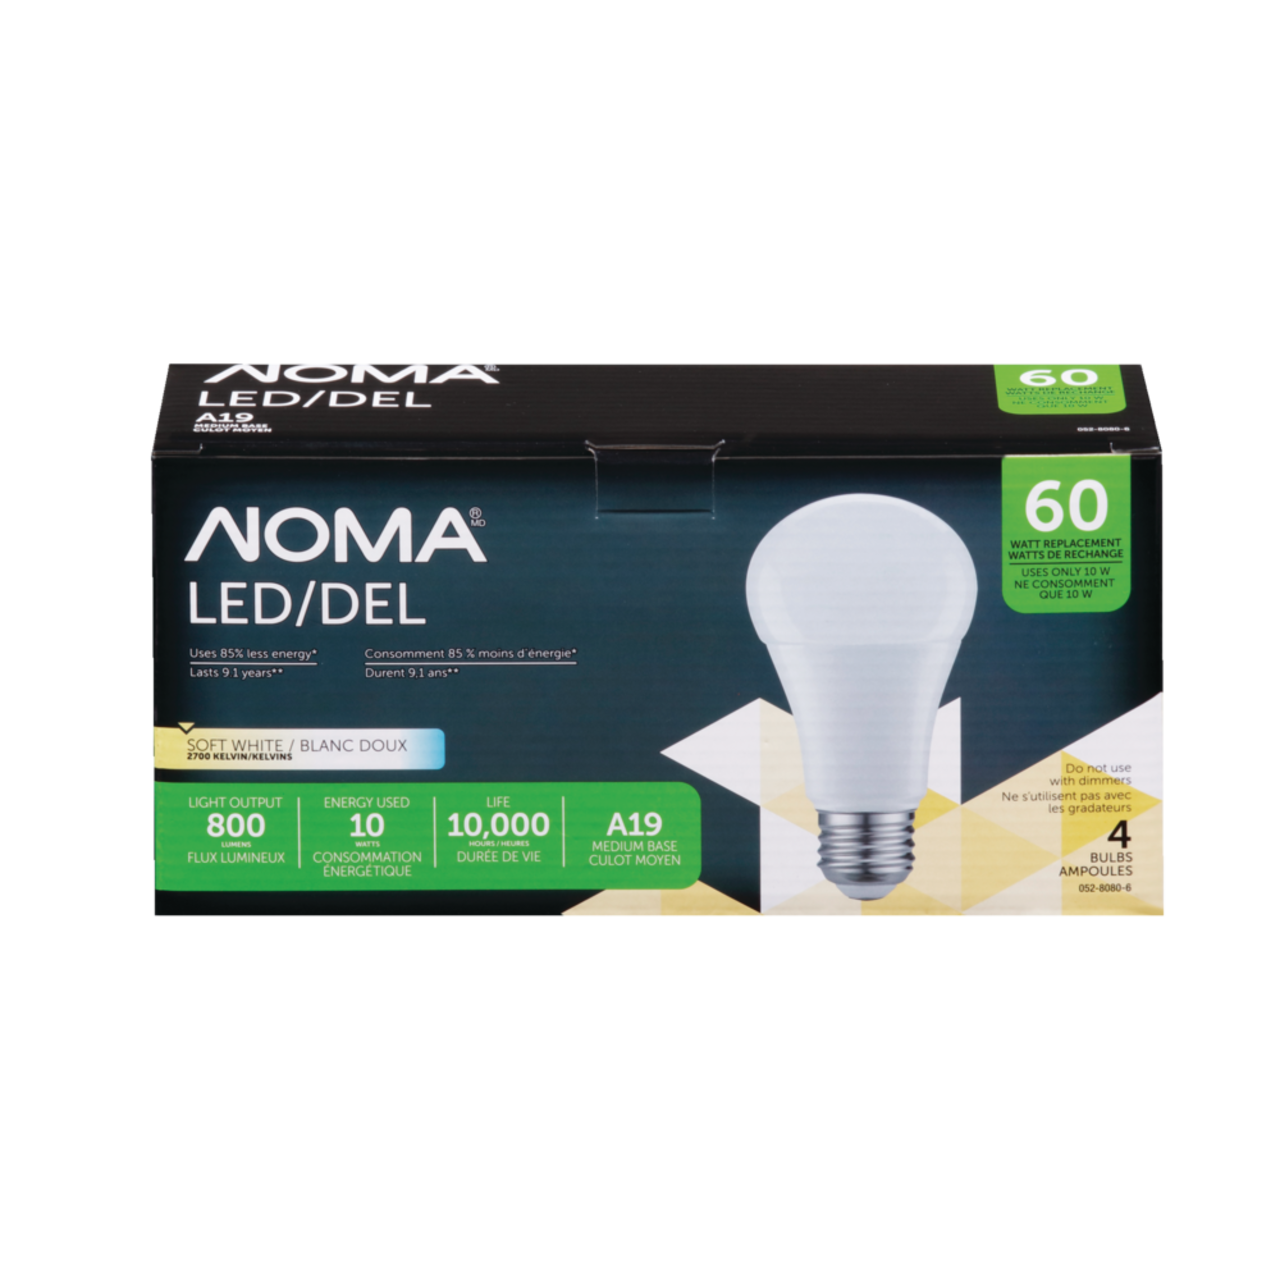 https://media-www.canadiantire.ca/product/fixing/electrical/light-bulbs/0528080/noma-led-a19-bulb-60w-soft-white-4-pack-non-dimmable-fd633173-0a92-466b-b25e-f2d75f242230.png?imdensity=1&imwidth=640&impolicy=mZoom